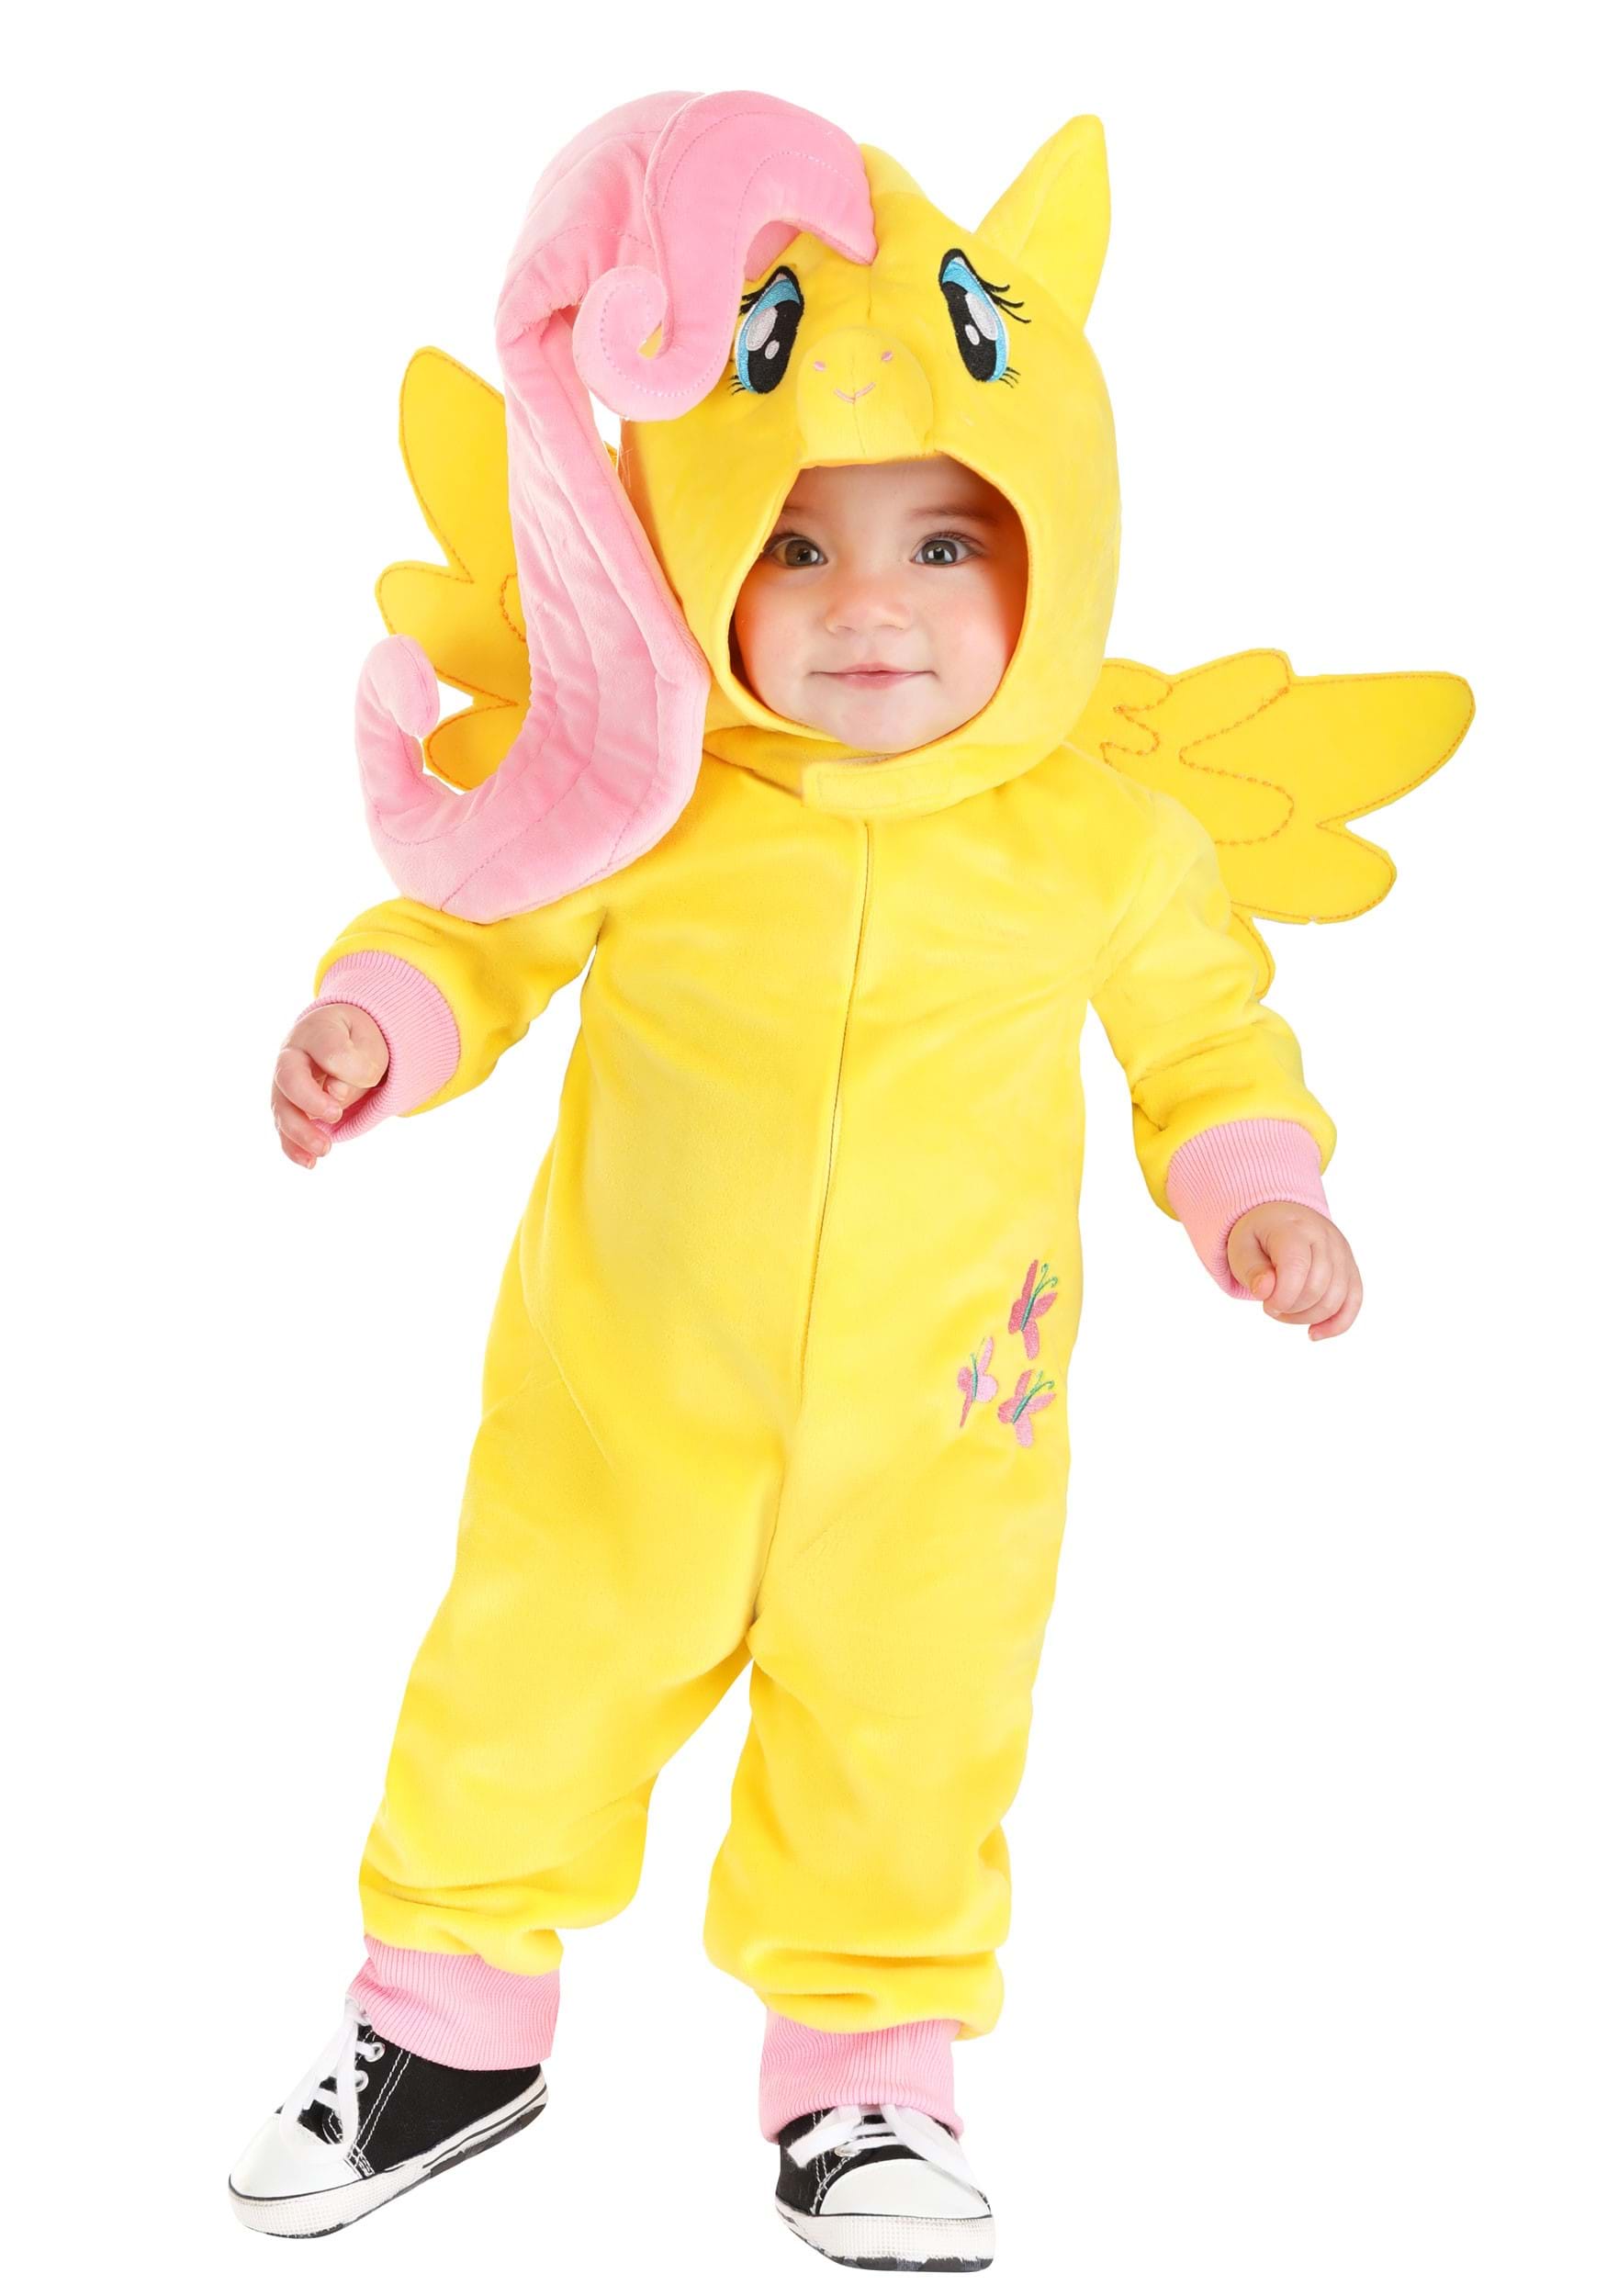 Photos - Fancy Dress Hasbro FUN Costumes Fluttershy My Little Pony Costume for Infants Pink/Yellow 